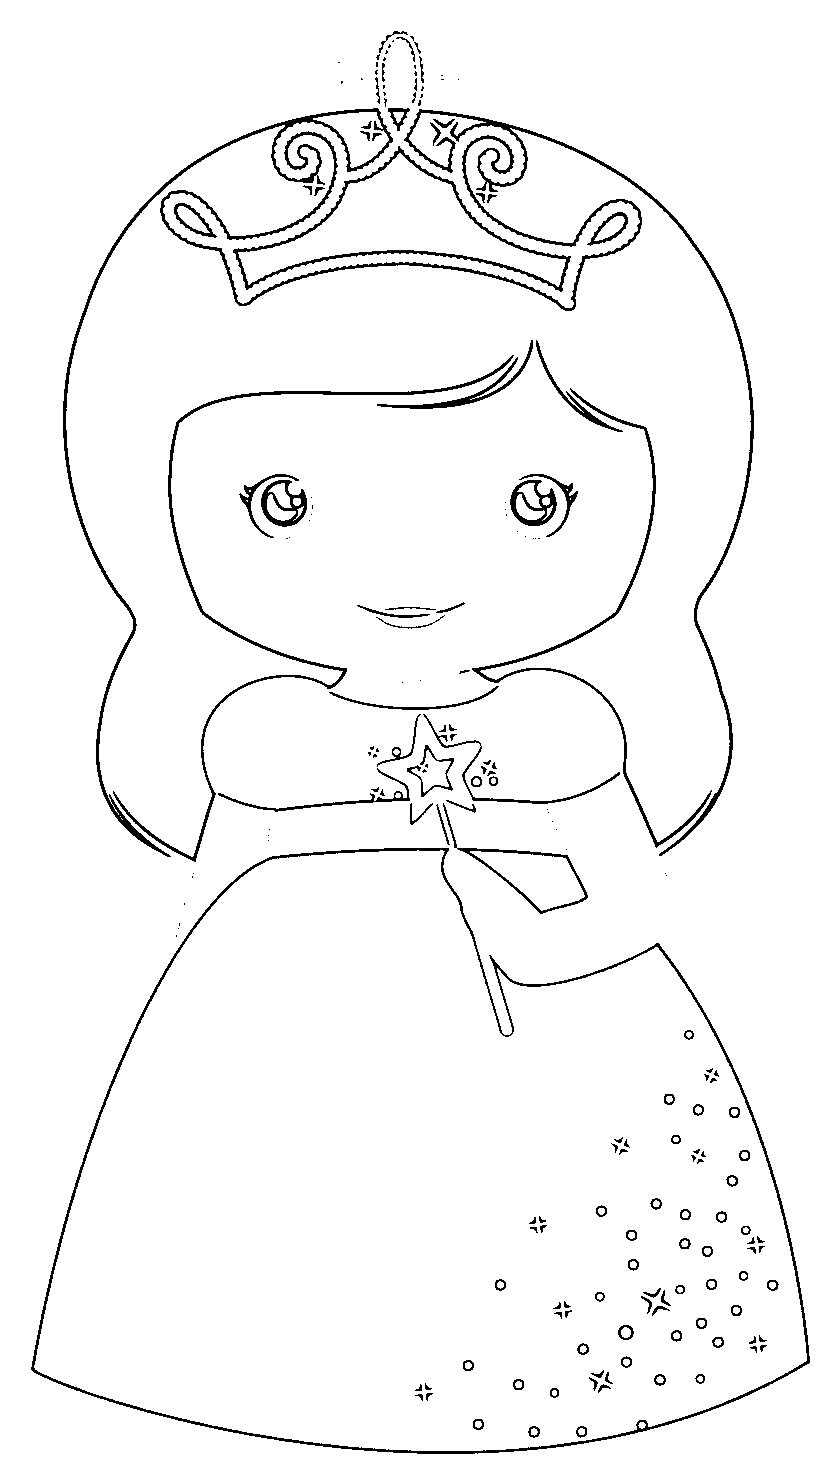 Printable Princess as Child outline Coloring Page for kids.